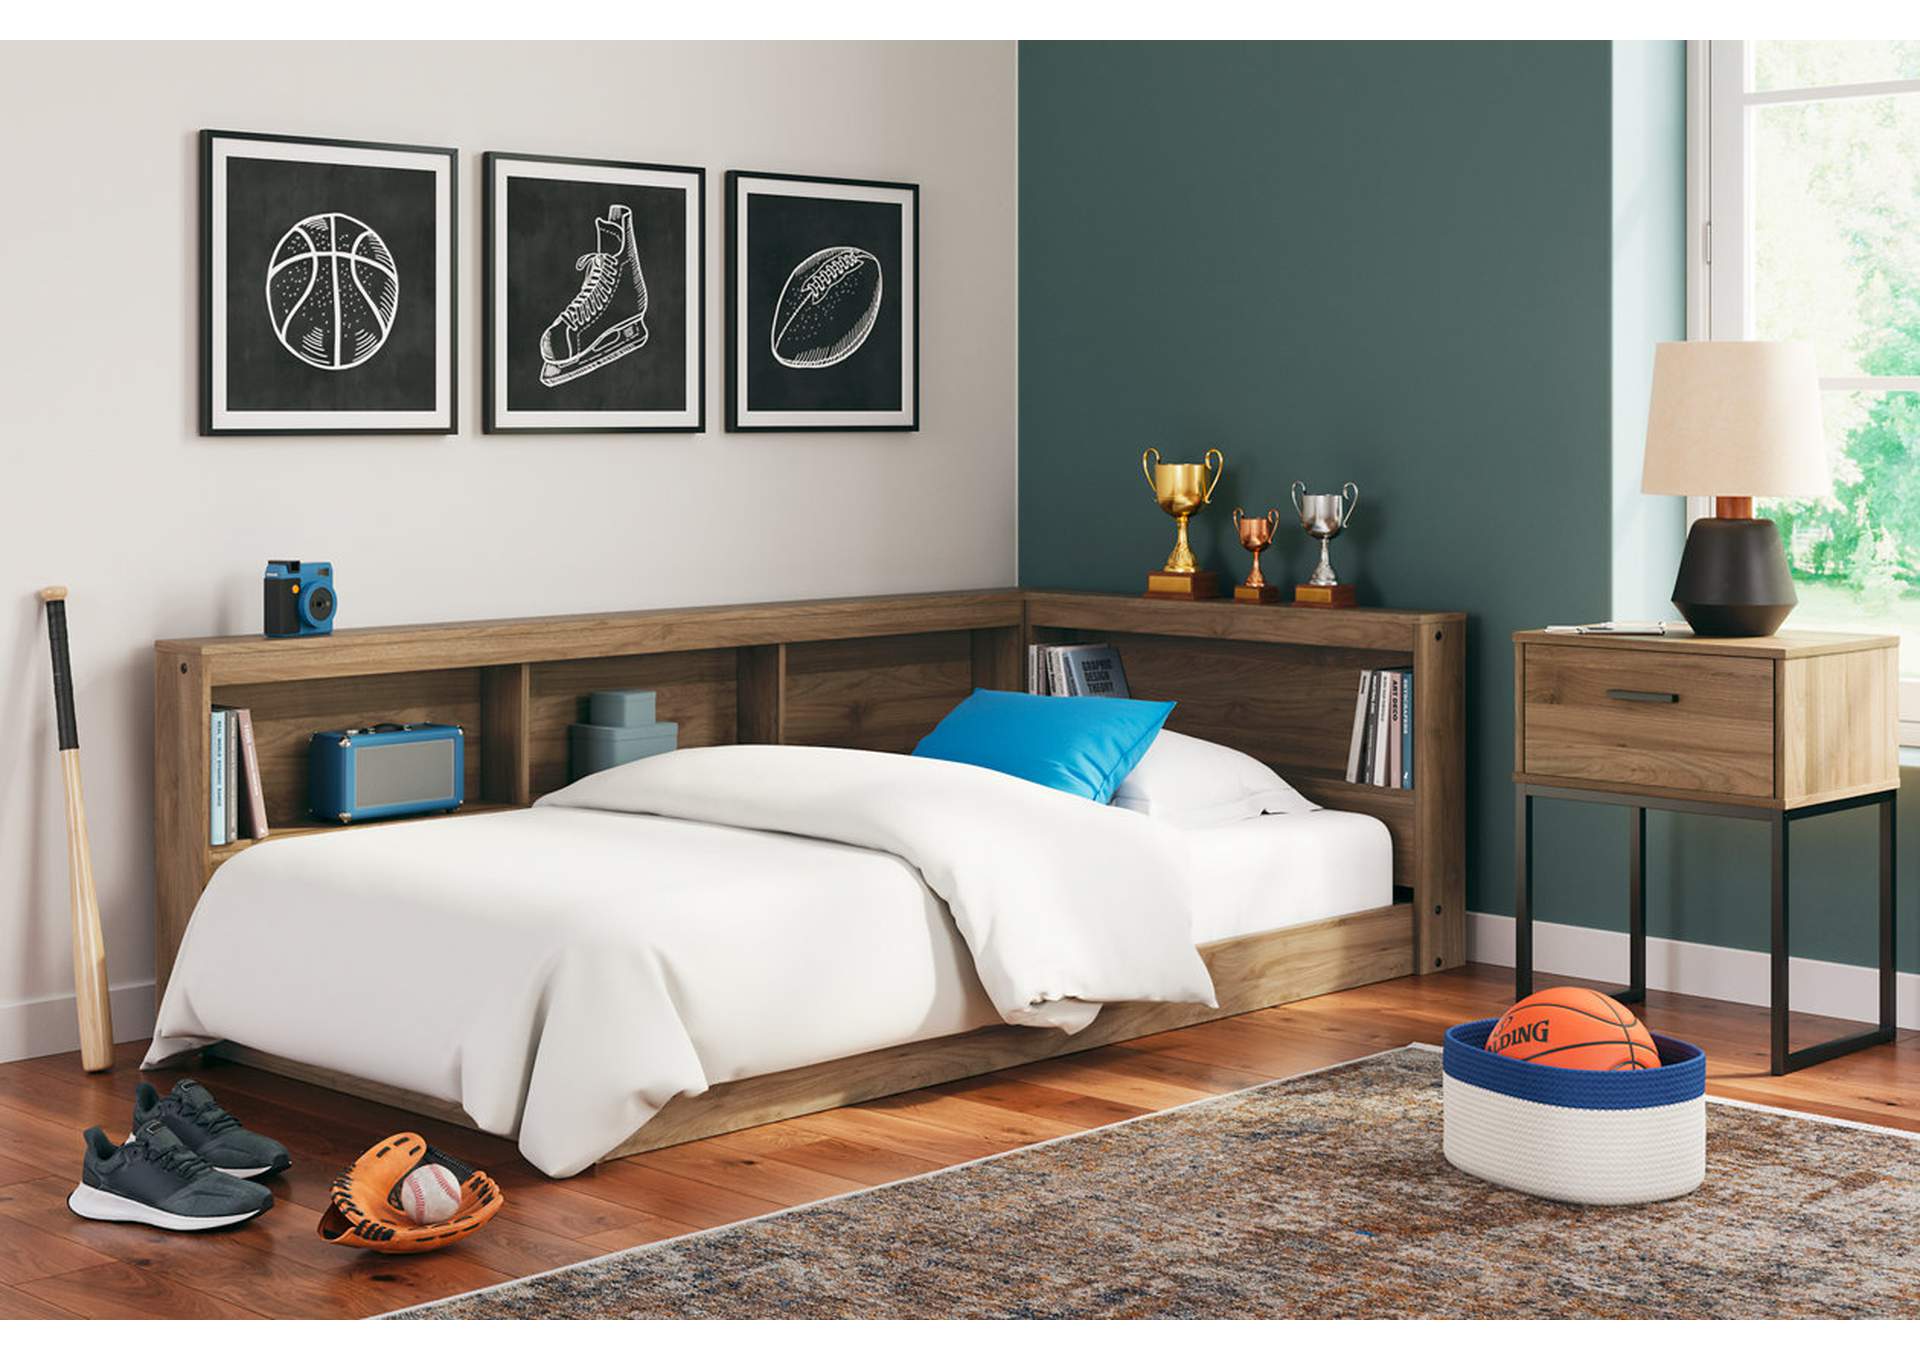 Deanlow Twin Bookcase Storage Bed,Signature Design By Ashley